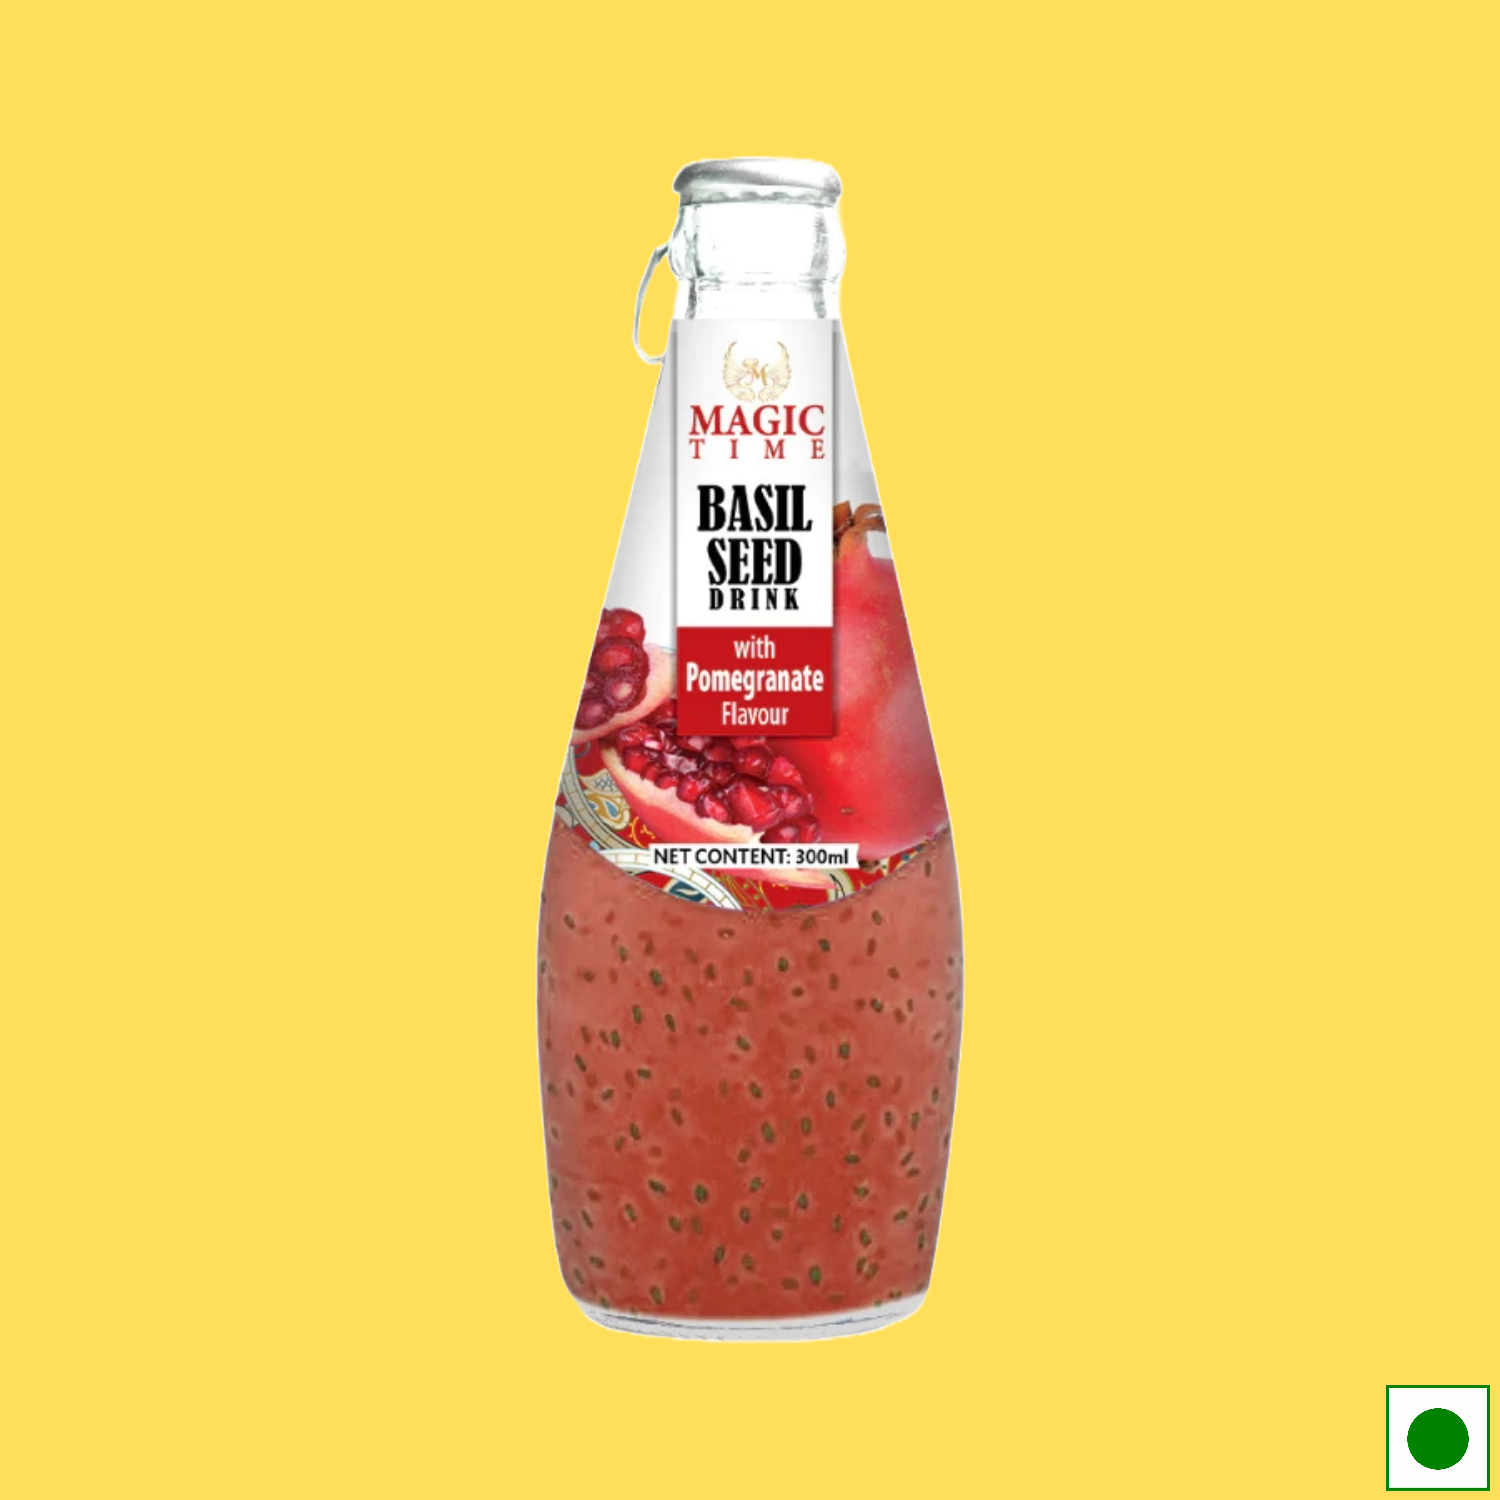 Magic Time Pomegranate Flavored Basil Seed Drink, 300ml (Imported)